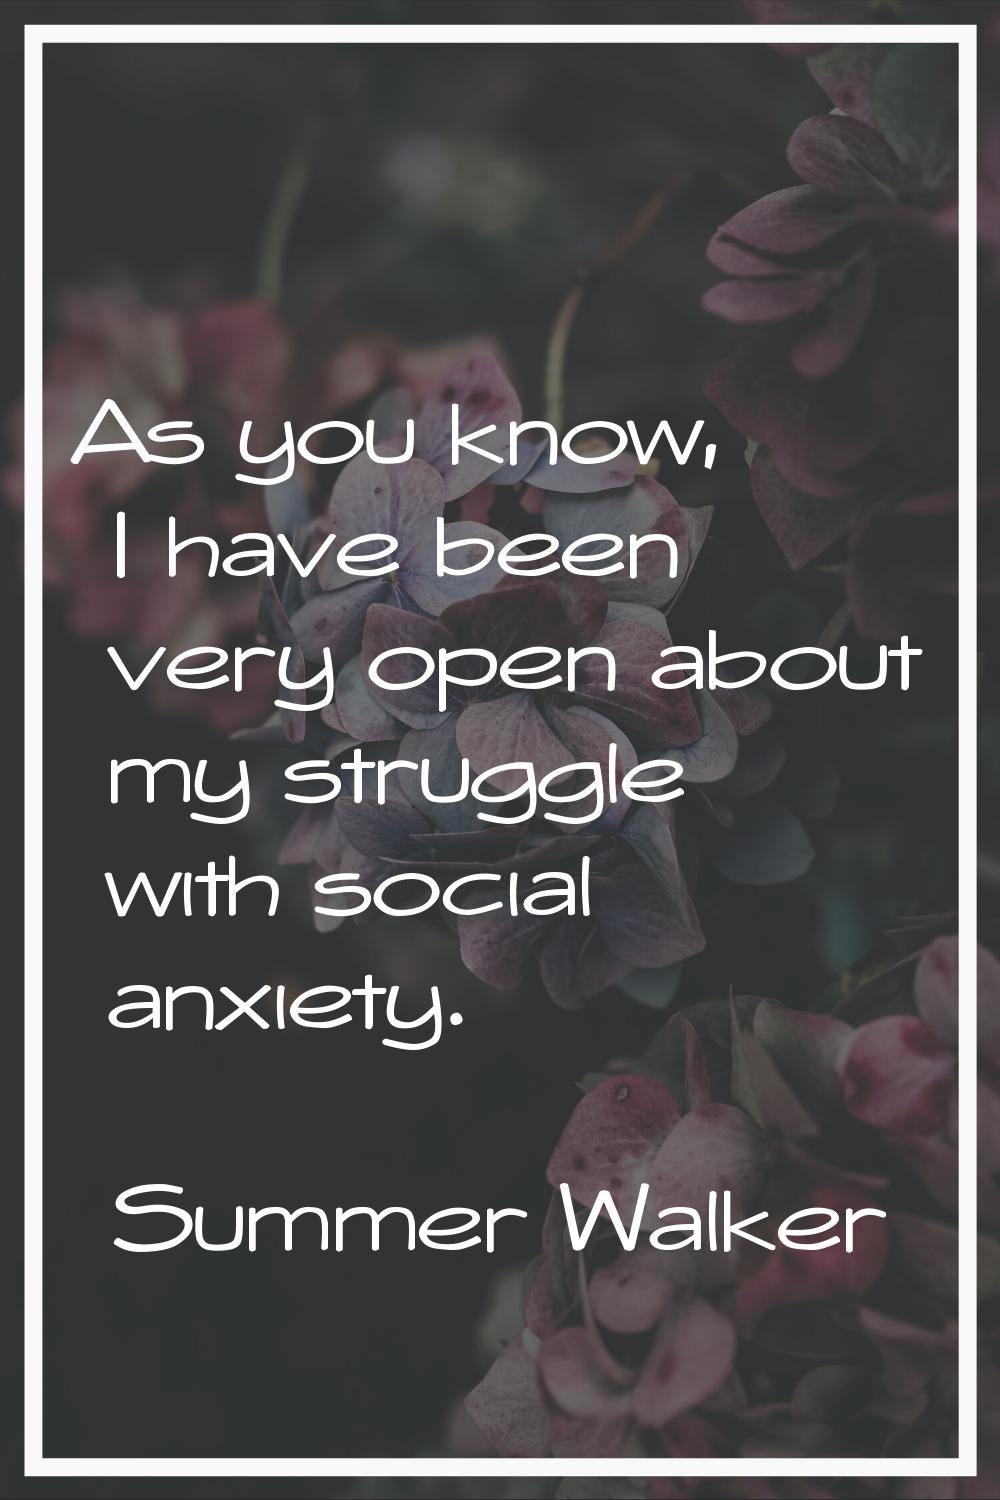 As you know, I have been very open about my struggle with social anxiety.